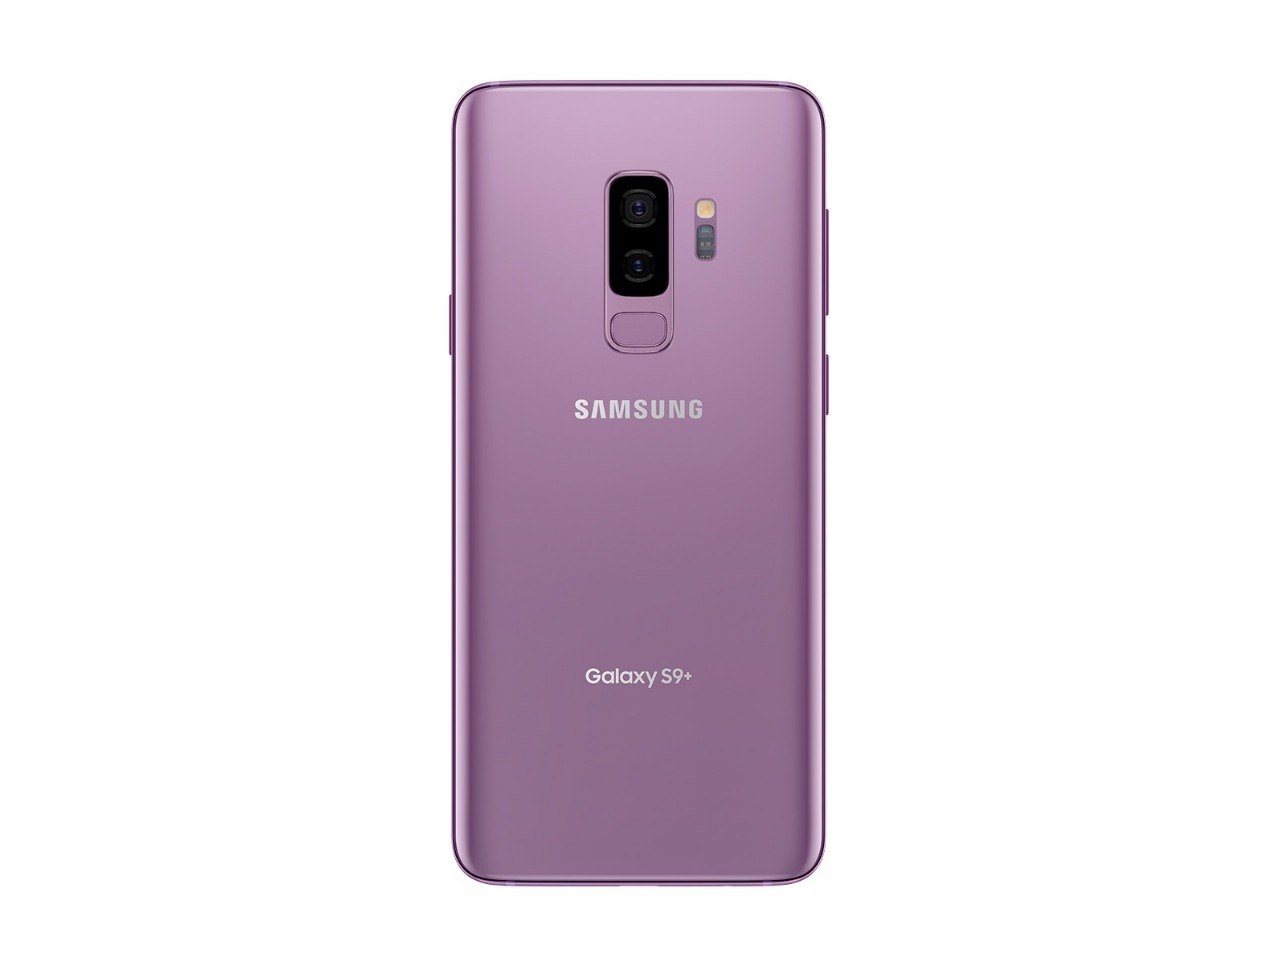 SAMSUN G Galaxy S9*  mobile phone,gadget,communication device,electronic device,feature phone